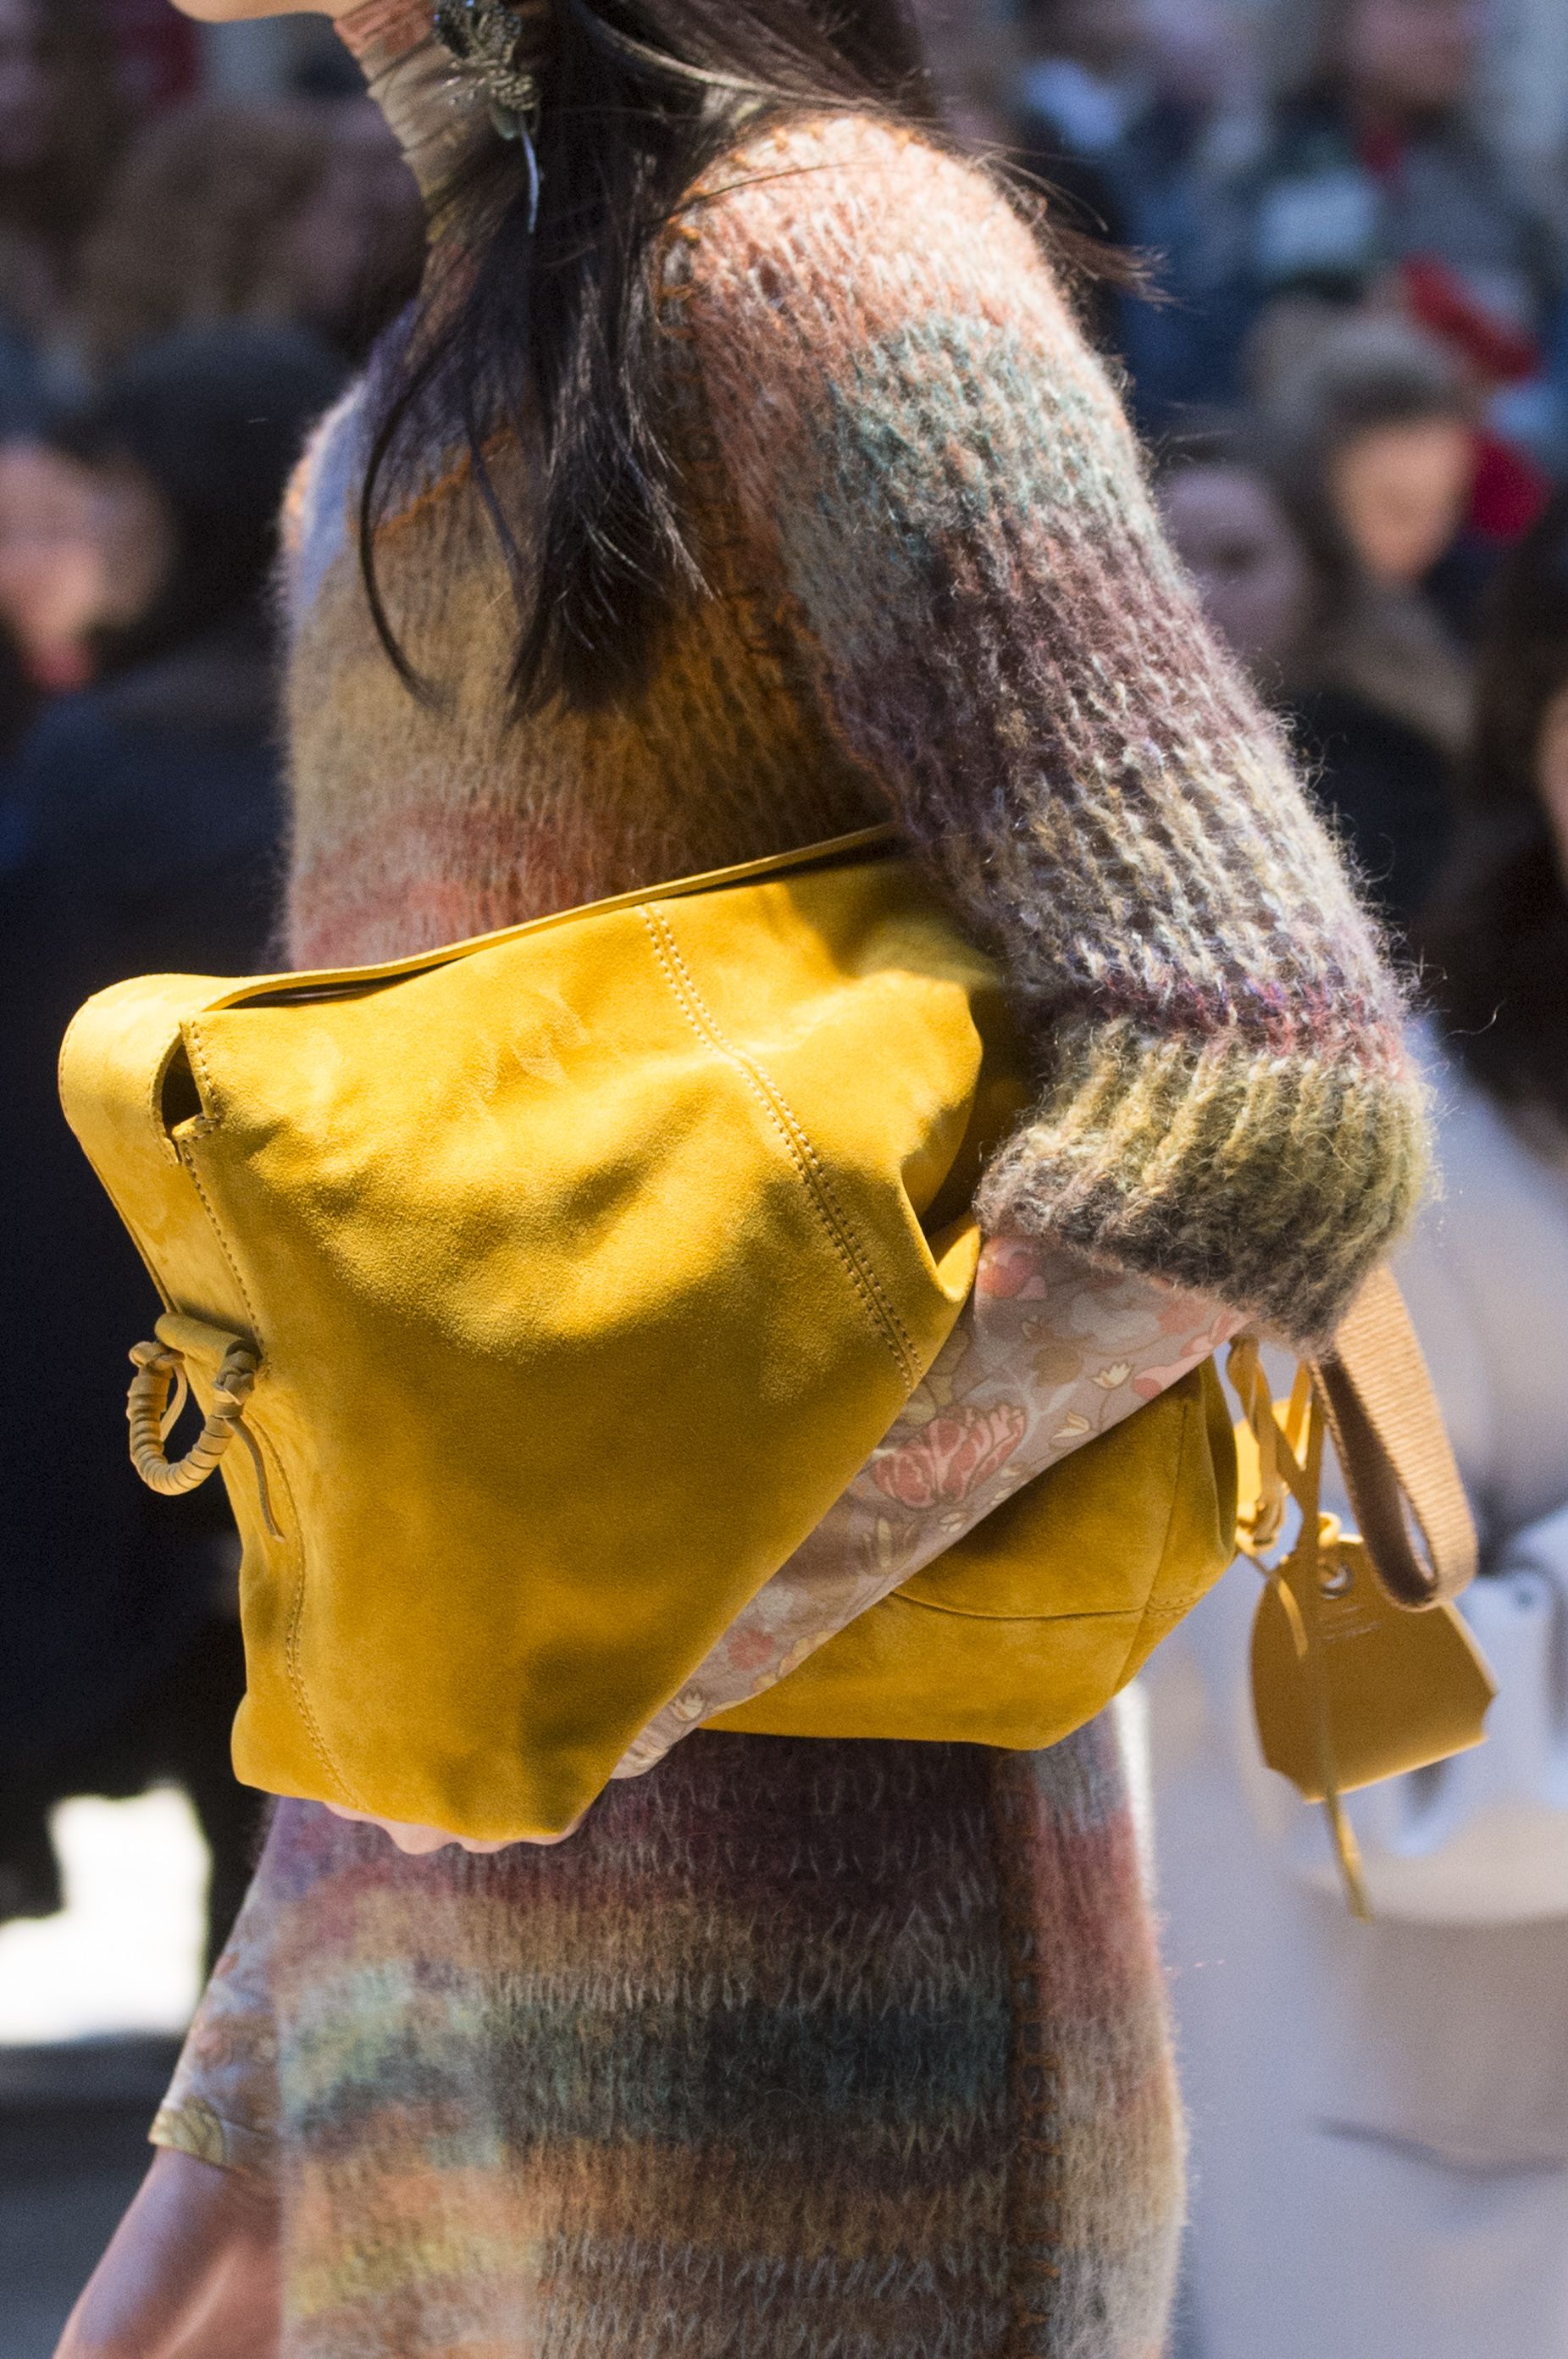 Your Ultimate Guide To Handbags: Fall Edition - J. Cathell